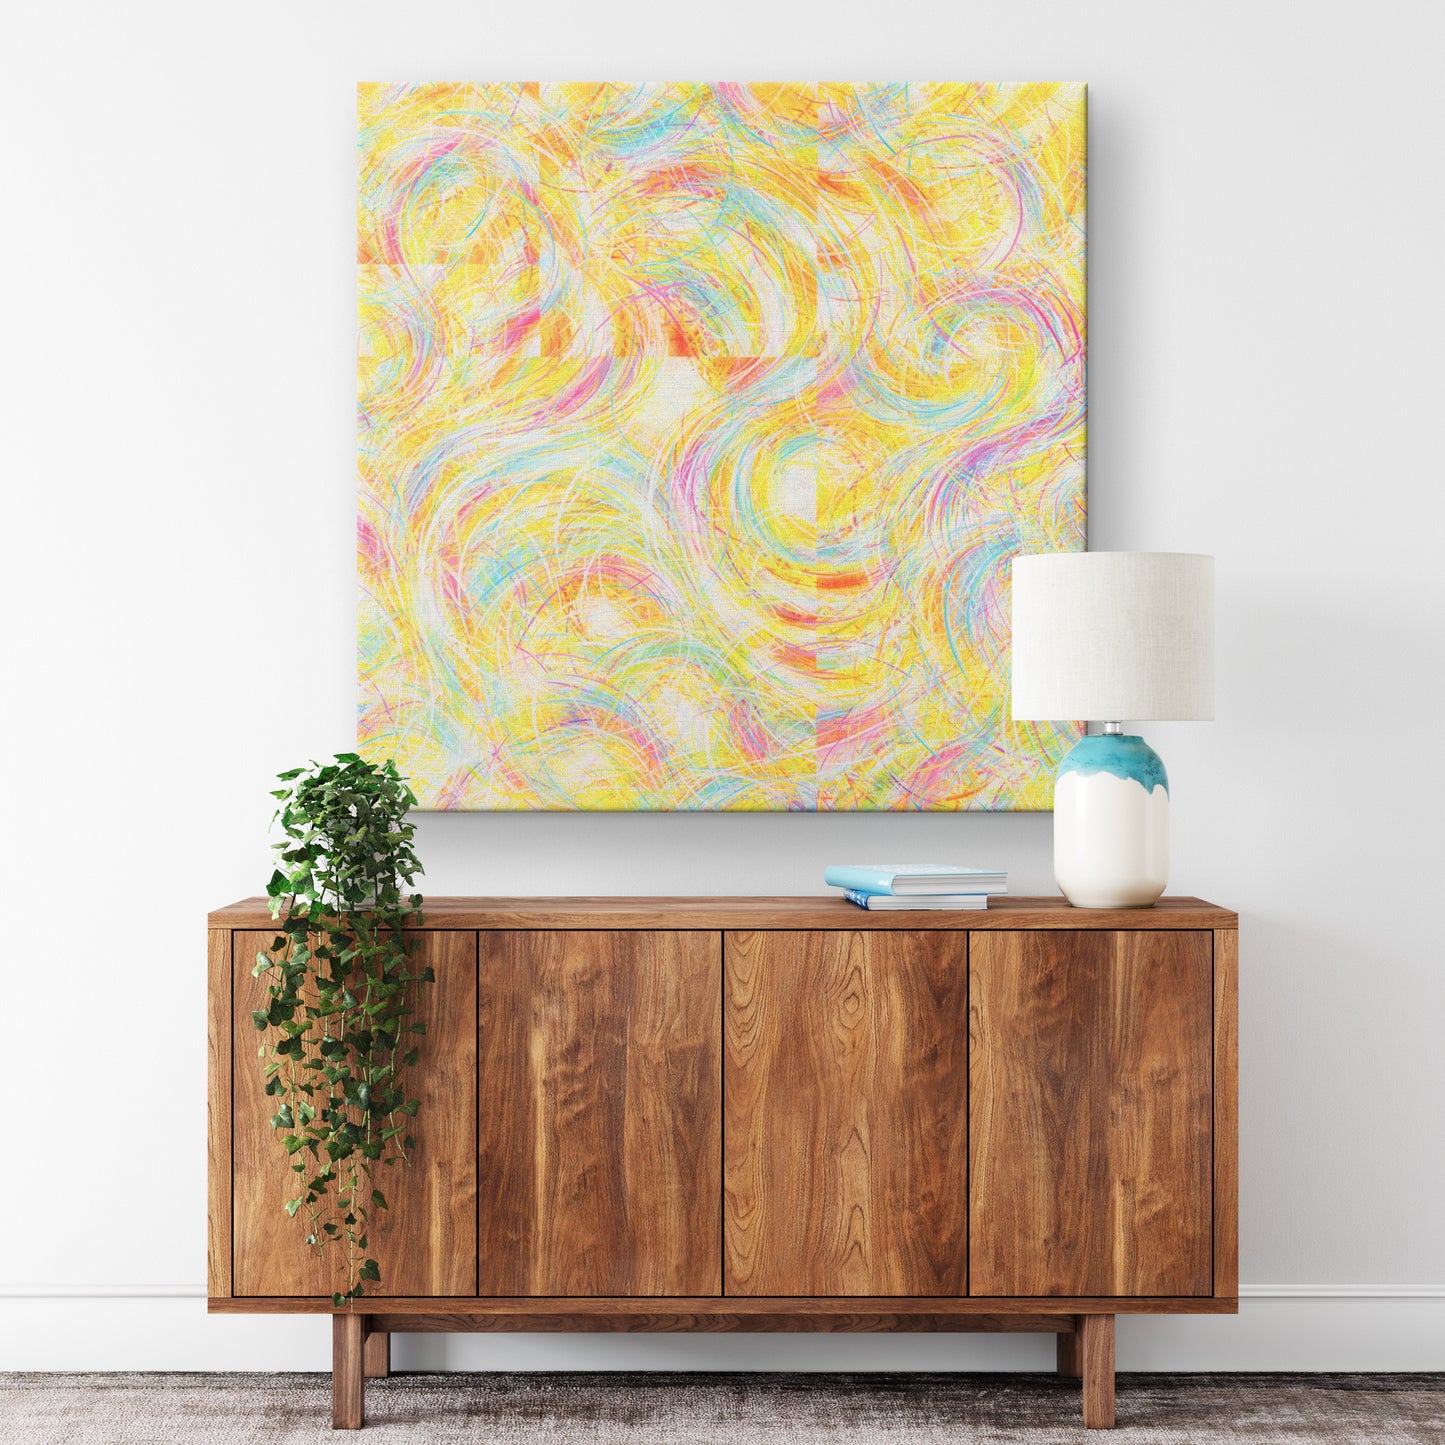 stunning abstract art for sale